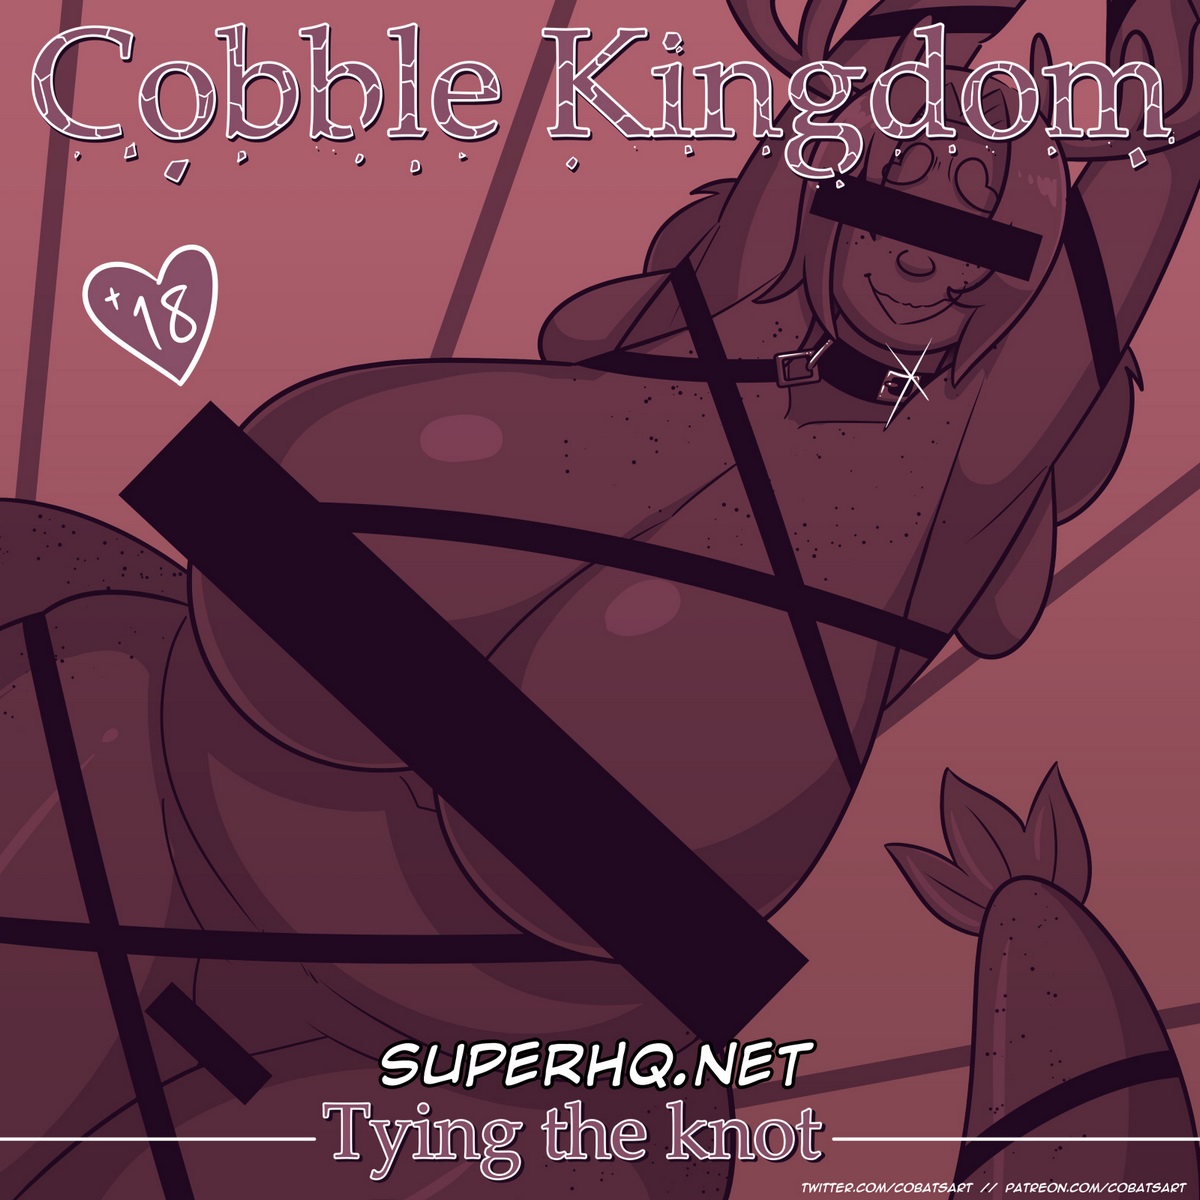 Cobble Kingdom, Tying the Knot